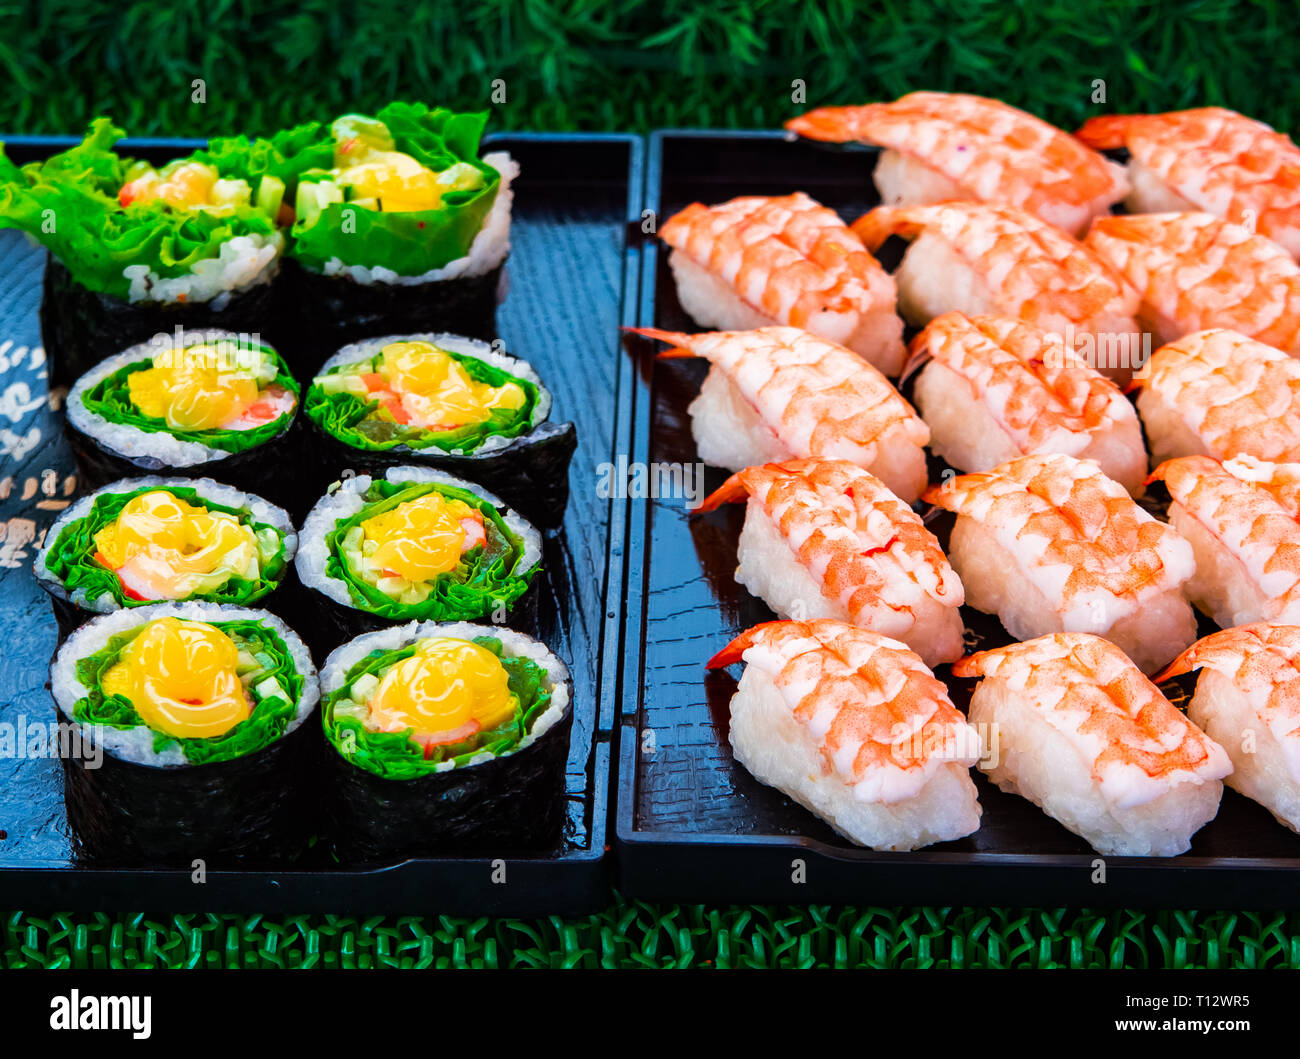 Sushi rolls japanese delicacy. Japanese traditional food from rice and fish or sea food.  A set of delicious delicacies in a day market in Thailand, A Stock Photo